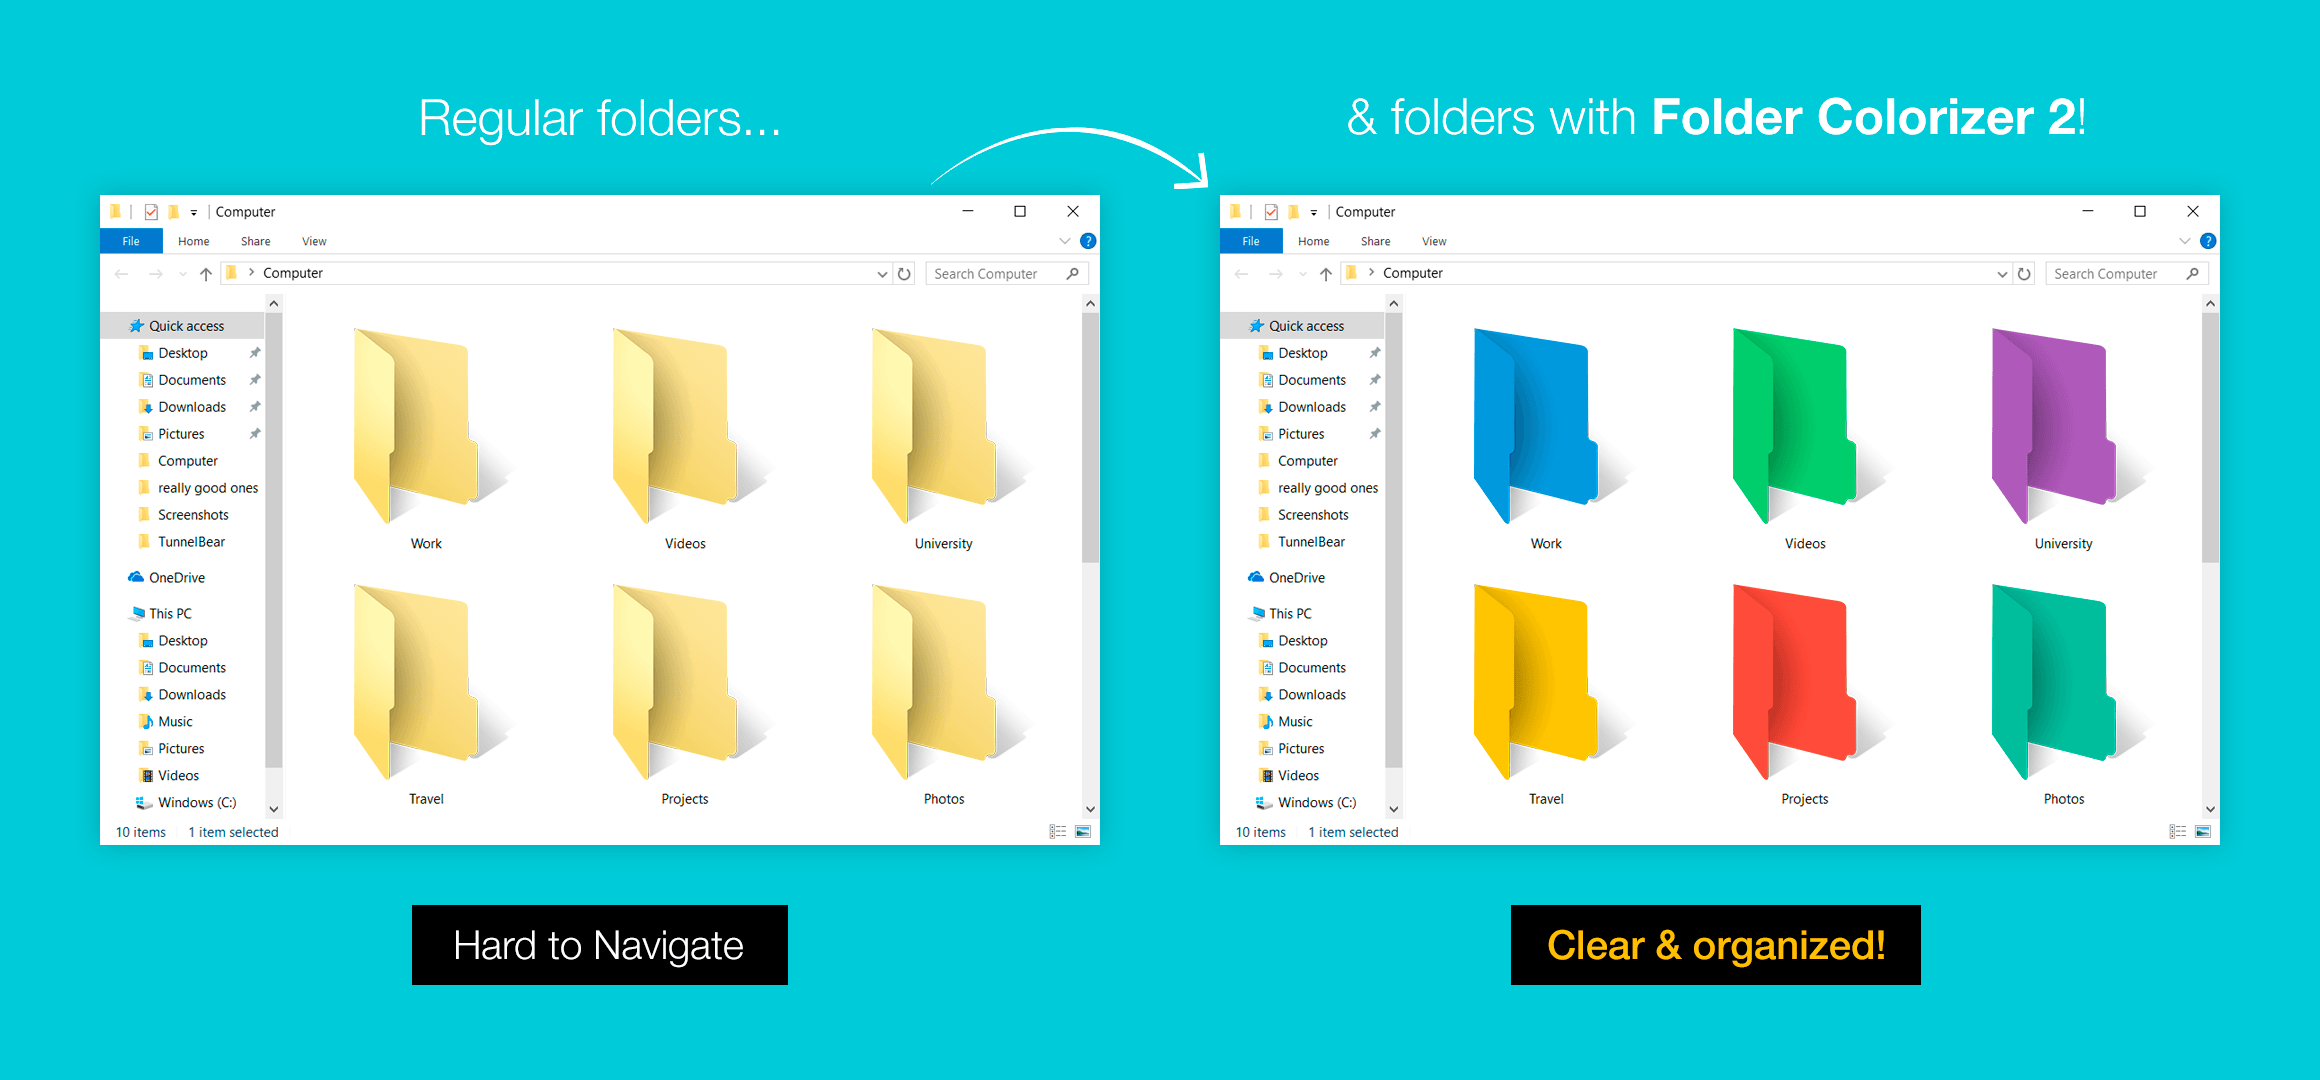 Before and after you use Folder Colorizer